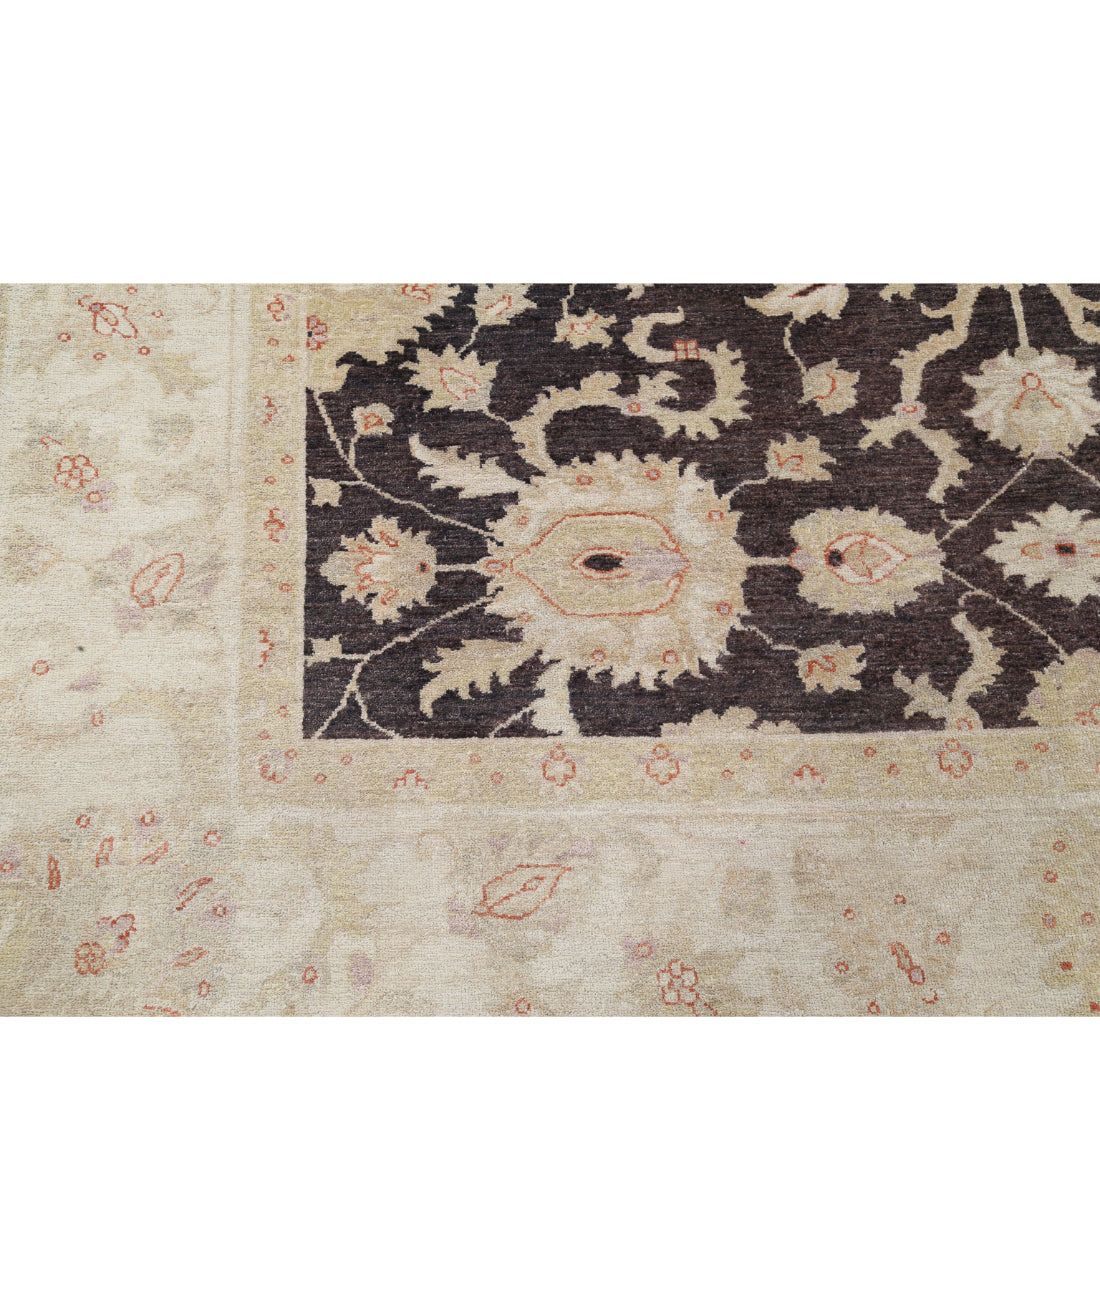 Hand Knotted Serenity Wool Rug - 7'11'' x 9'7'' 7'11'' x 9'7'' (238 X 288) / Black / Ivory